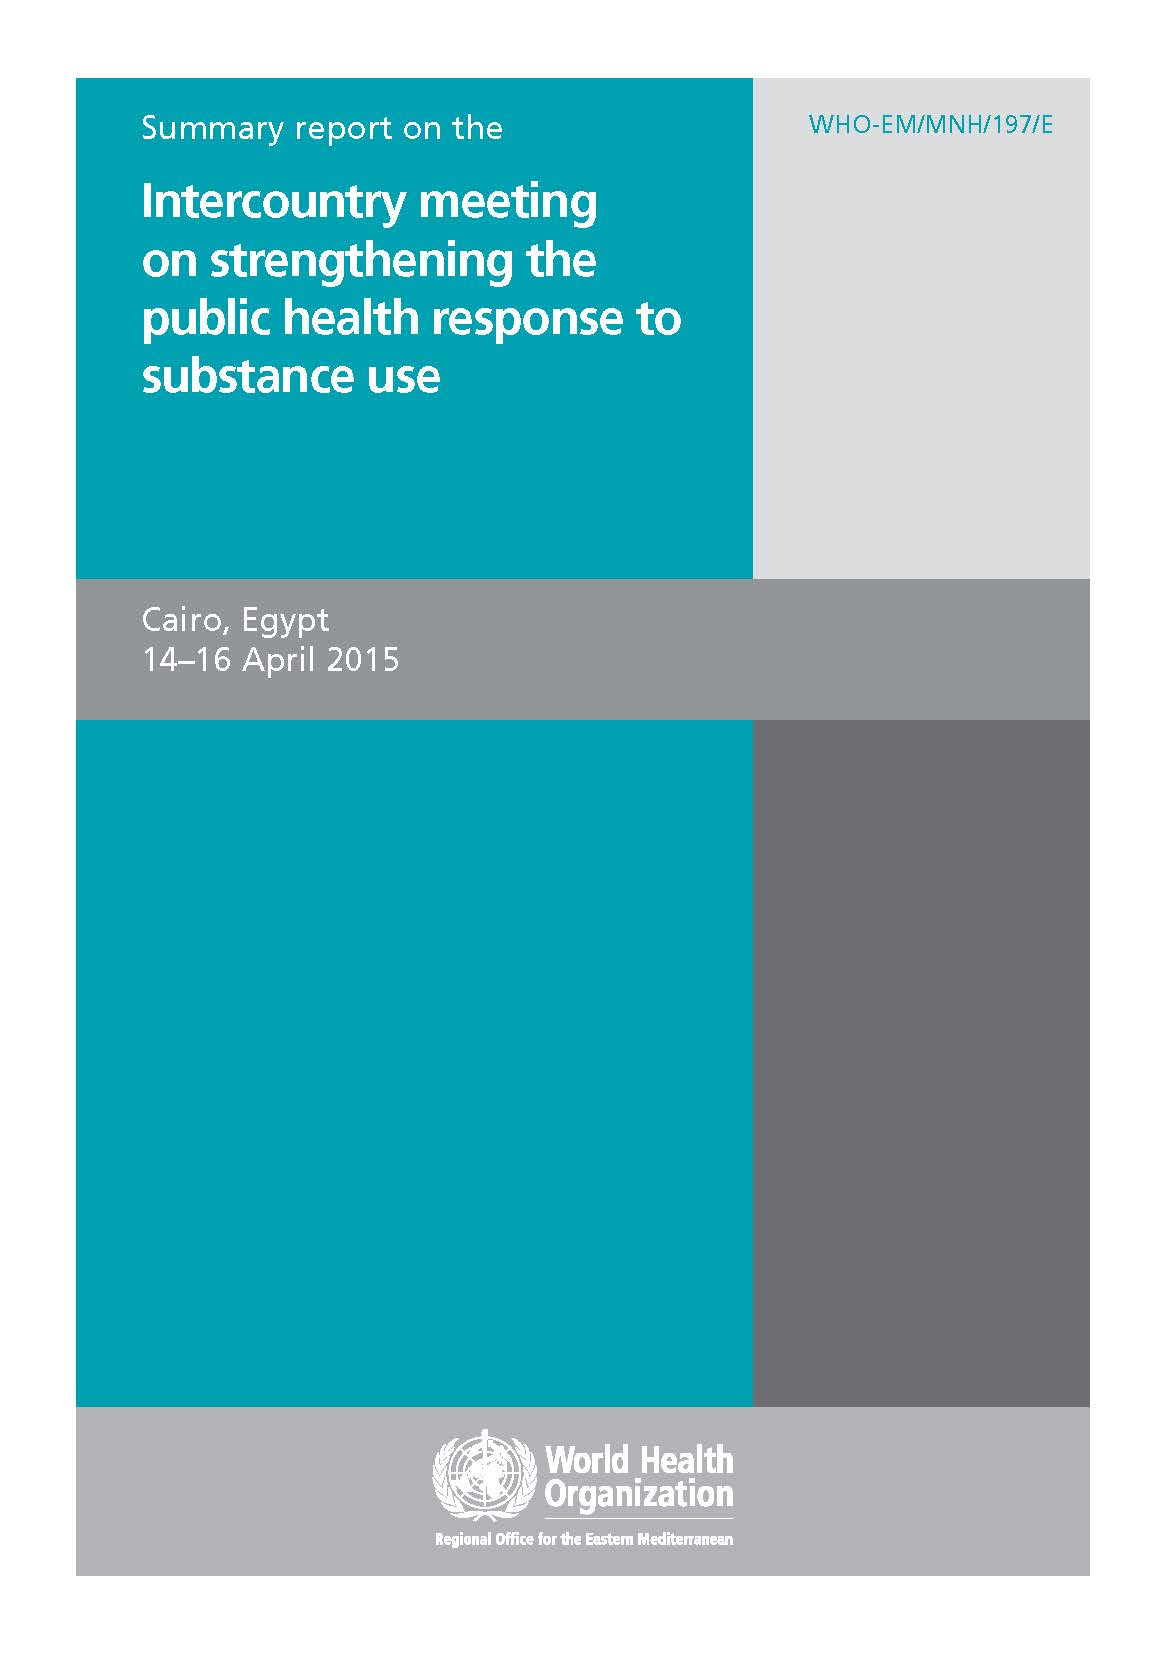 Summary report public health response to substance use meeting